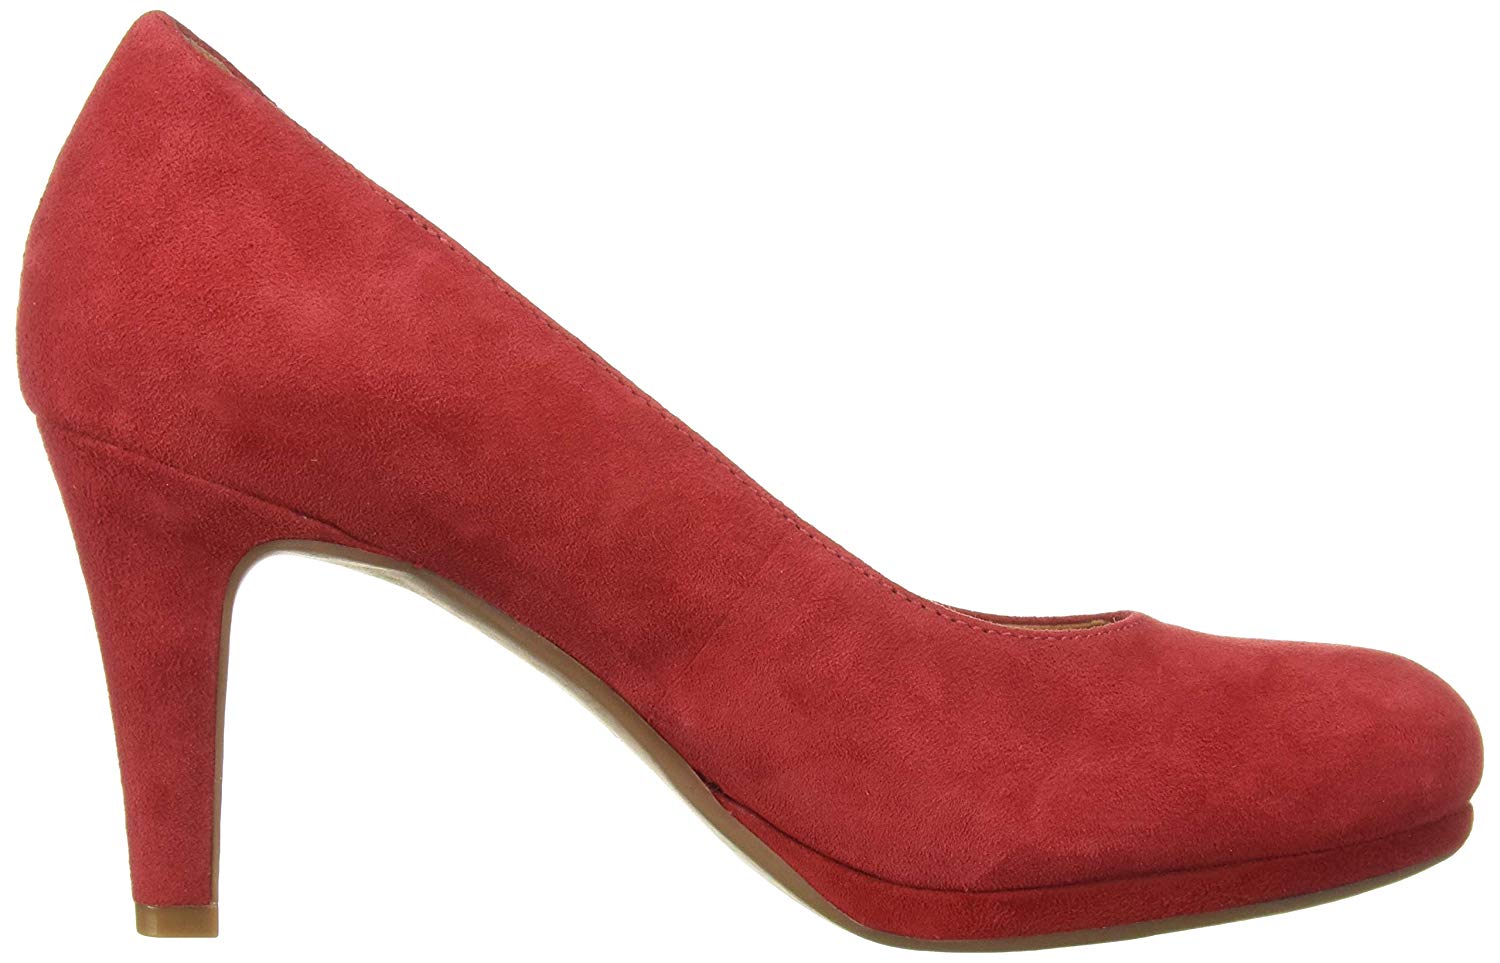 Naturalizer Womens Heels & Pumps in Red Color, Size 8.5 FFH | eBay